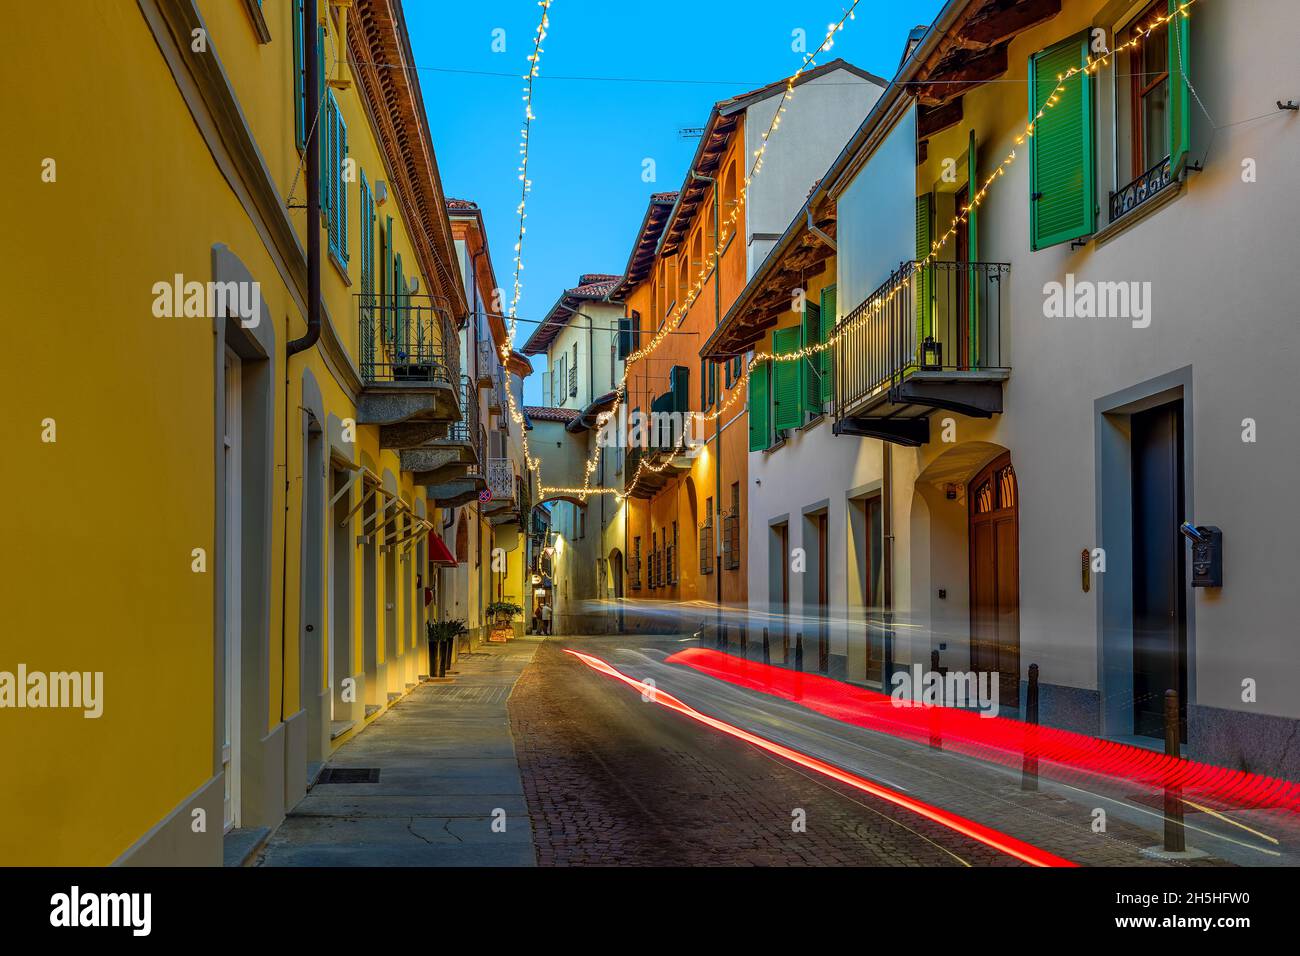 Narrow street and old houses illuminated by Christmas lights in the evening in old town of Alba, Piedmont, Northern Italy. Stock Photo